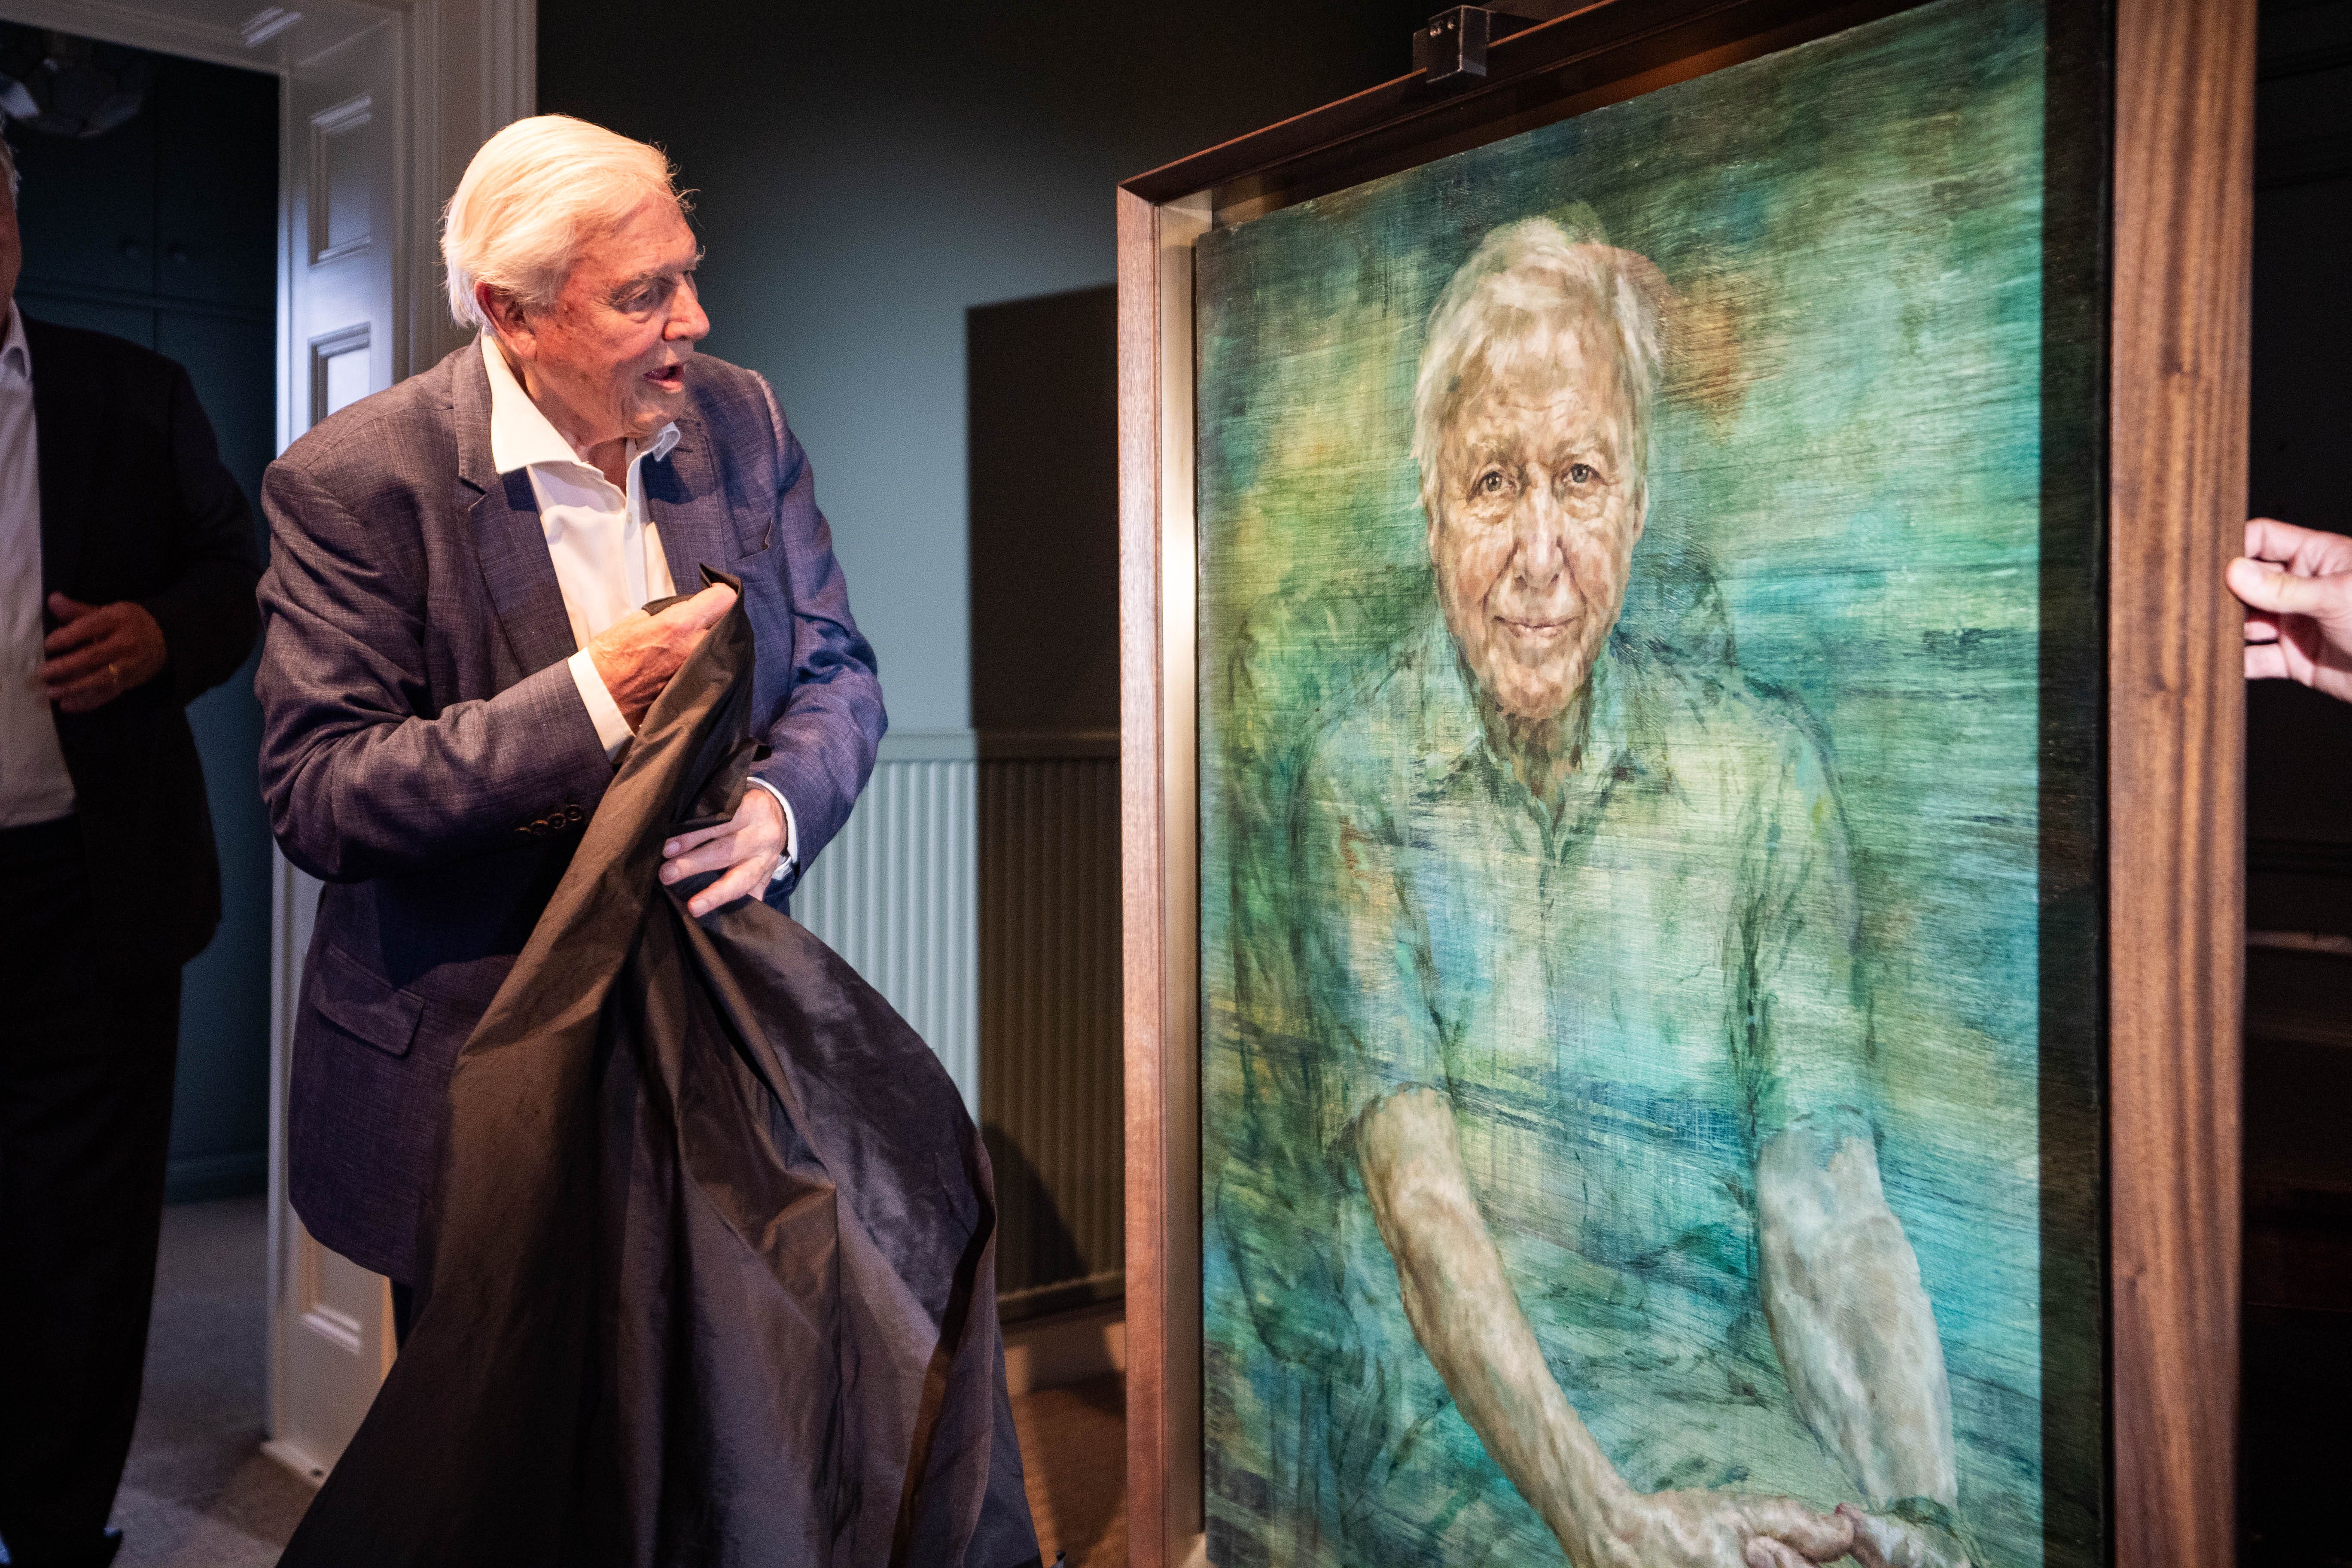 Sir David Attenborough during the unveiling of a portrait of the broadcaster and conservationist painted by Jonathan Yeo, at a private ceremony at the Royal Society in London (James Manning/PA)